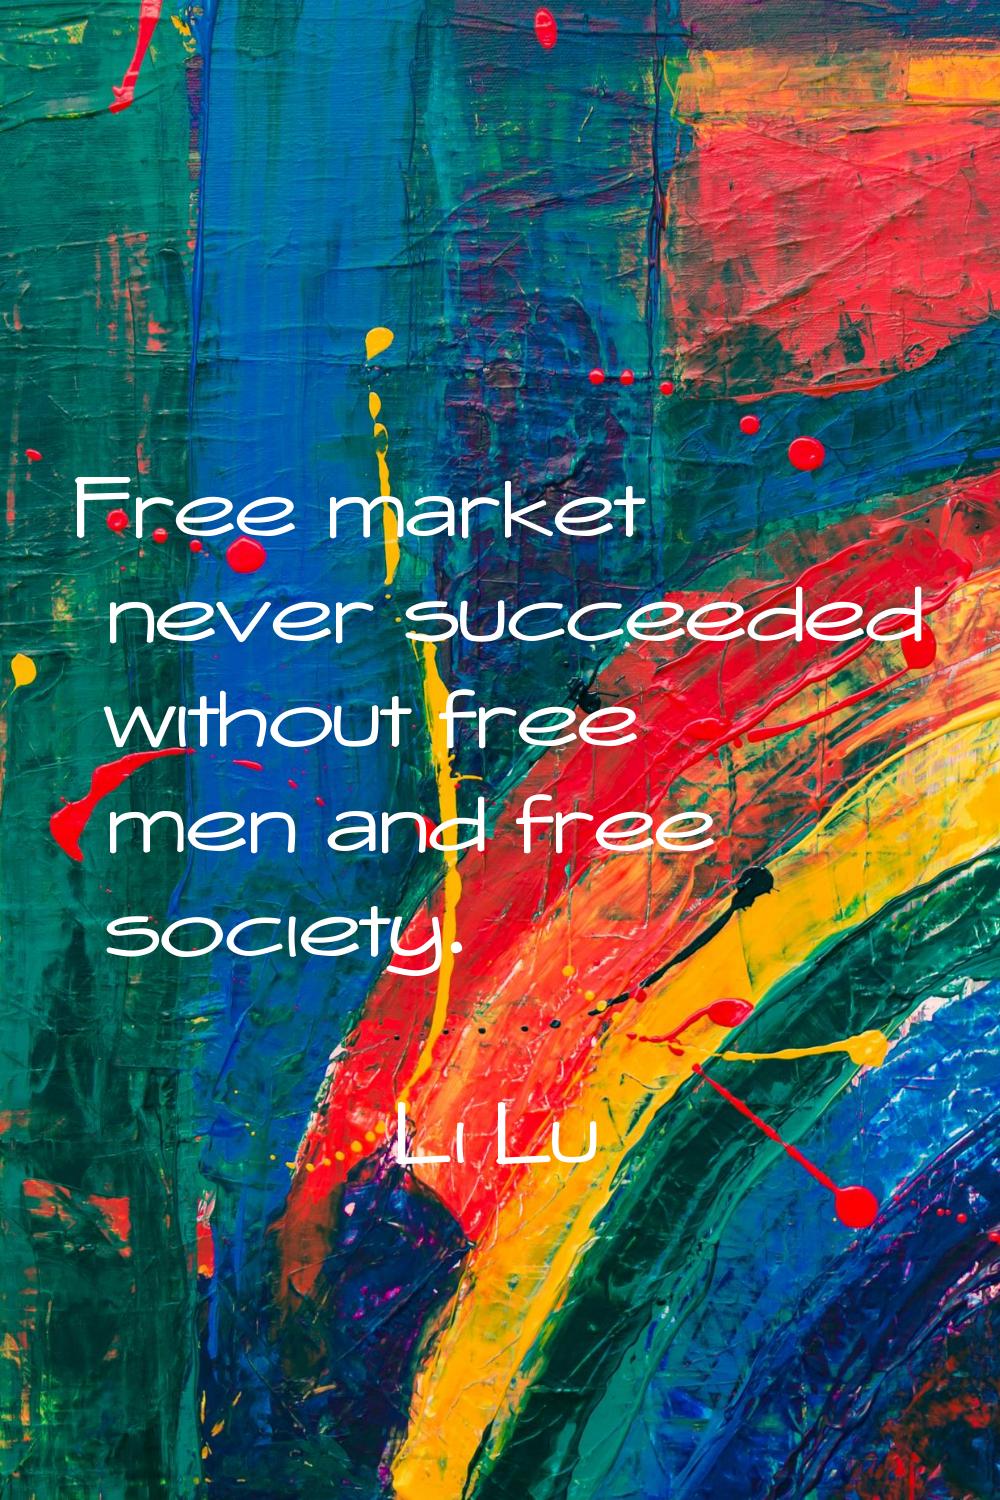 Free market never succeeded without free men and free society.